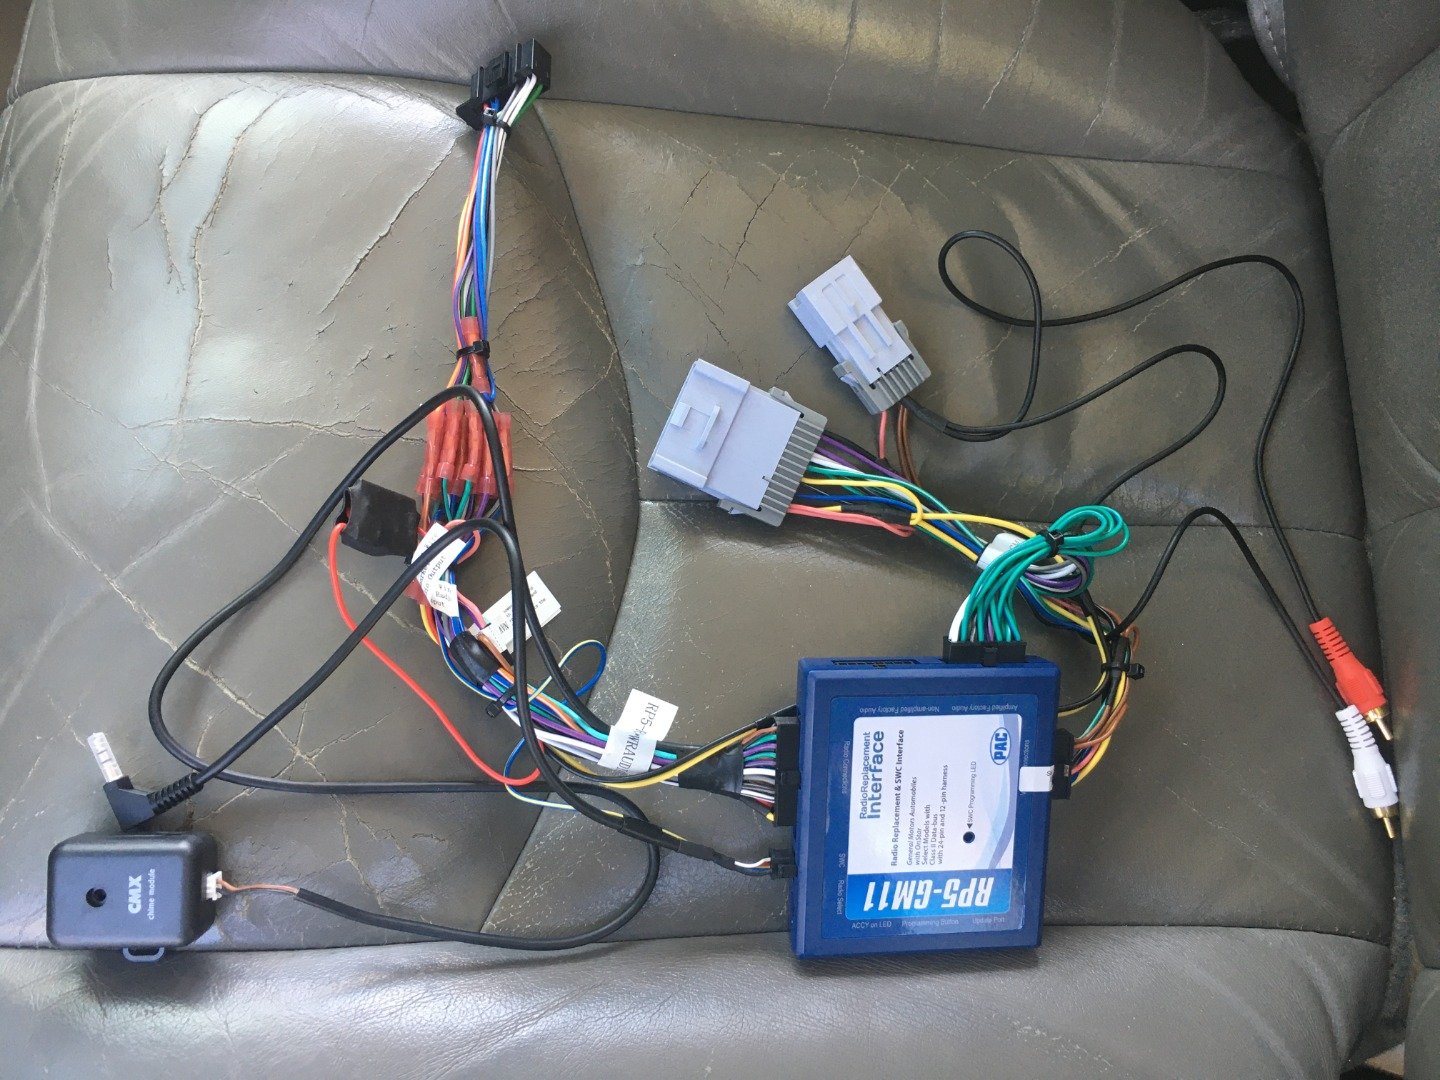 Customer Reviews: PAC RP5-GM11 Wiring Interface Connect a new car stereo  and retain OnStar®, factory amp, and steering wheel audio controls in  select 2000-up GM vehicles at Crutchfield Canada  Wiring Harness Rp5 Gm11 Wiring Diagram    Crutchfield